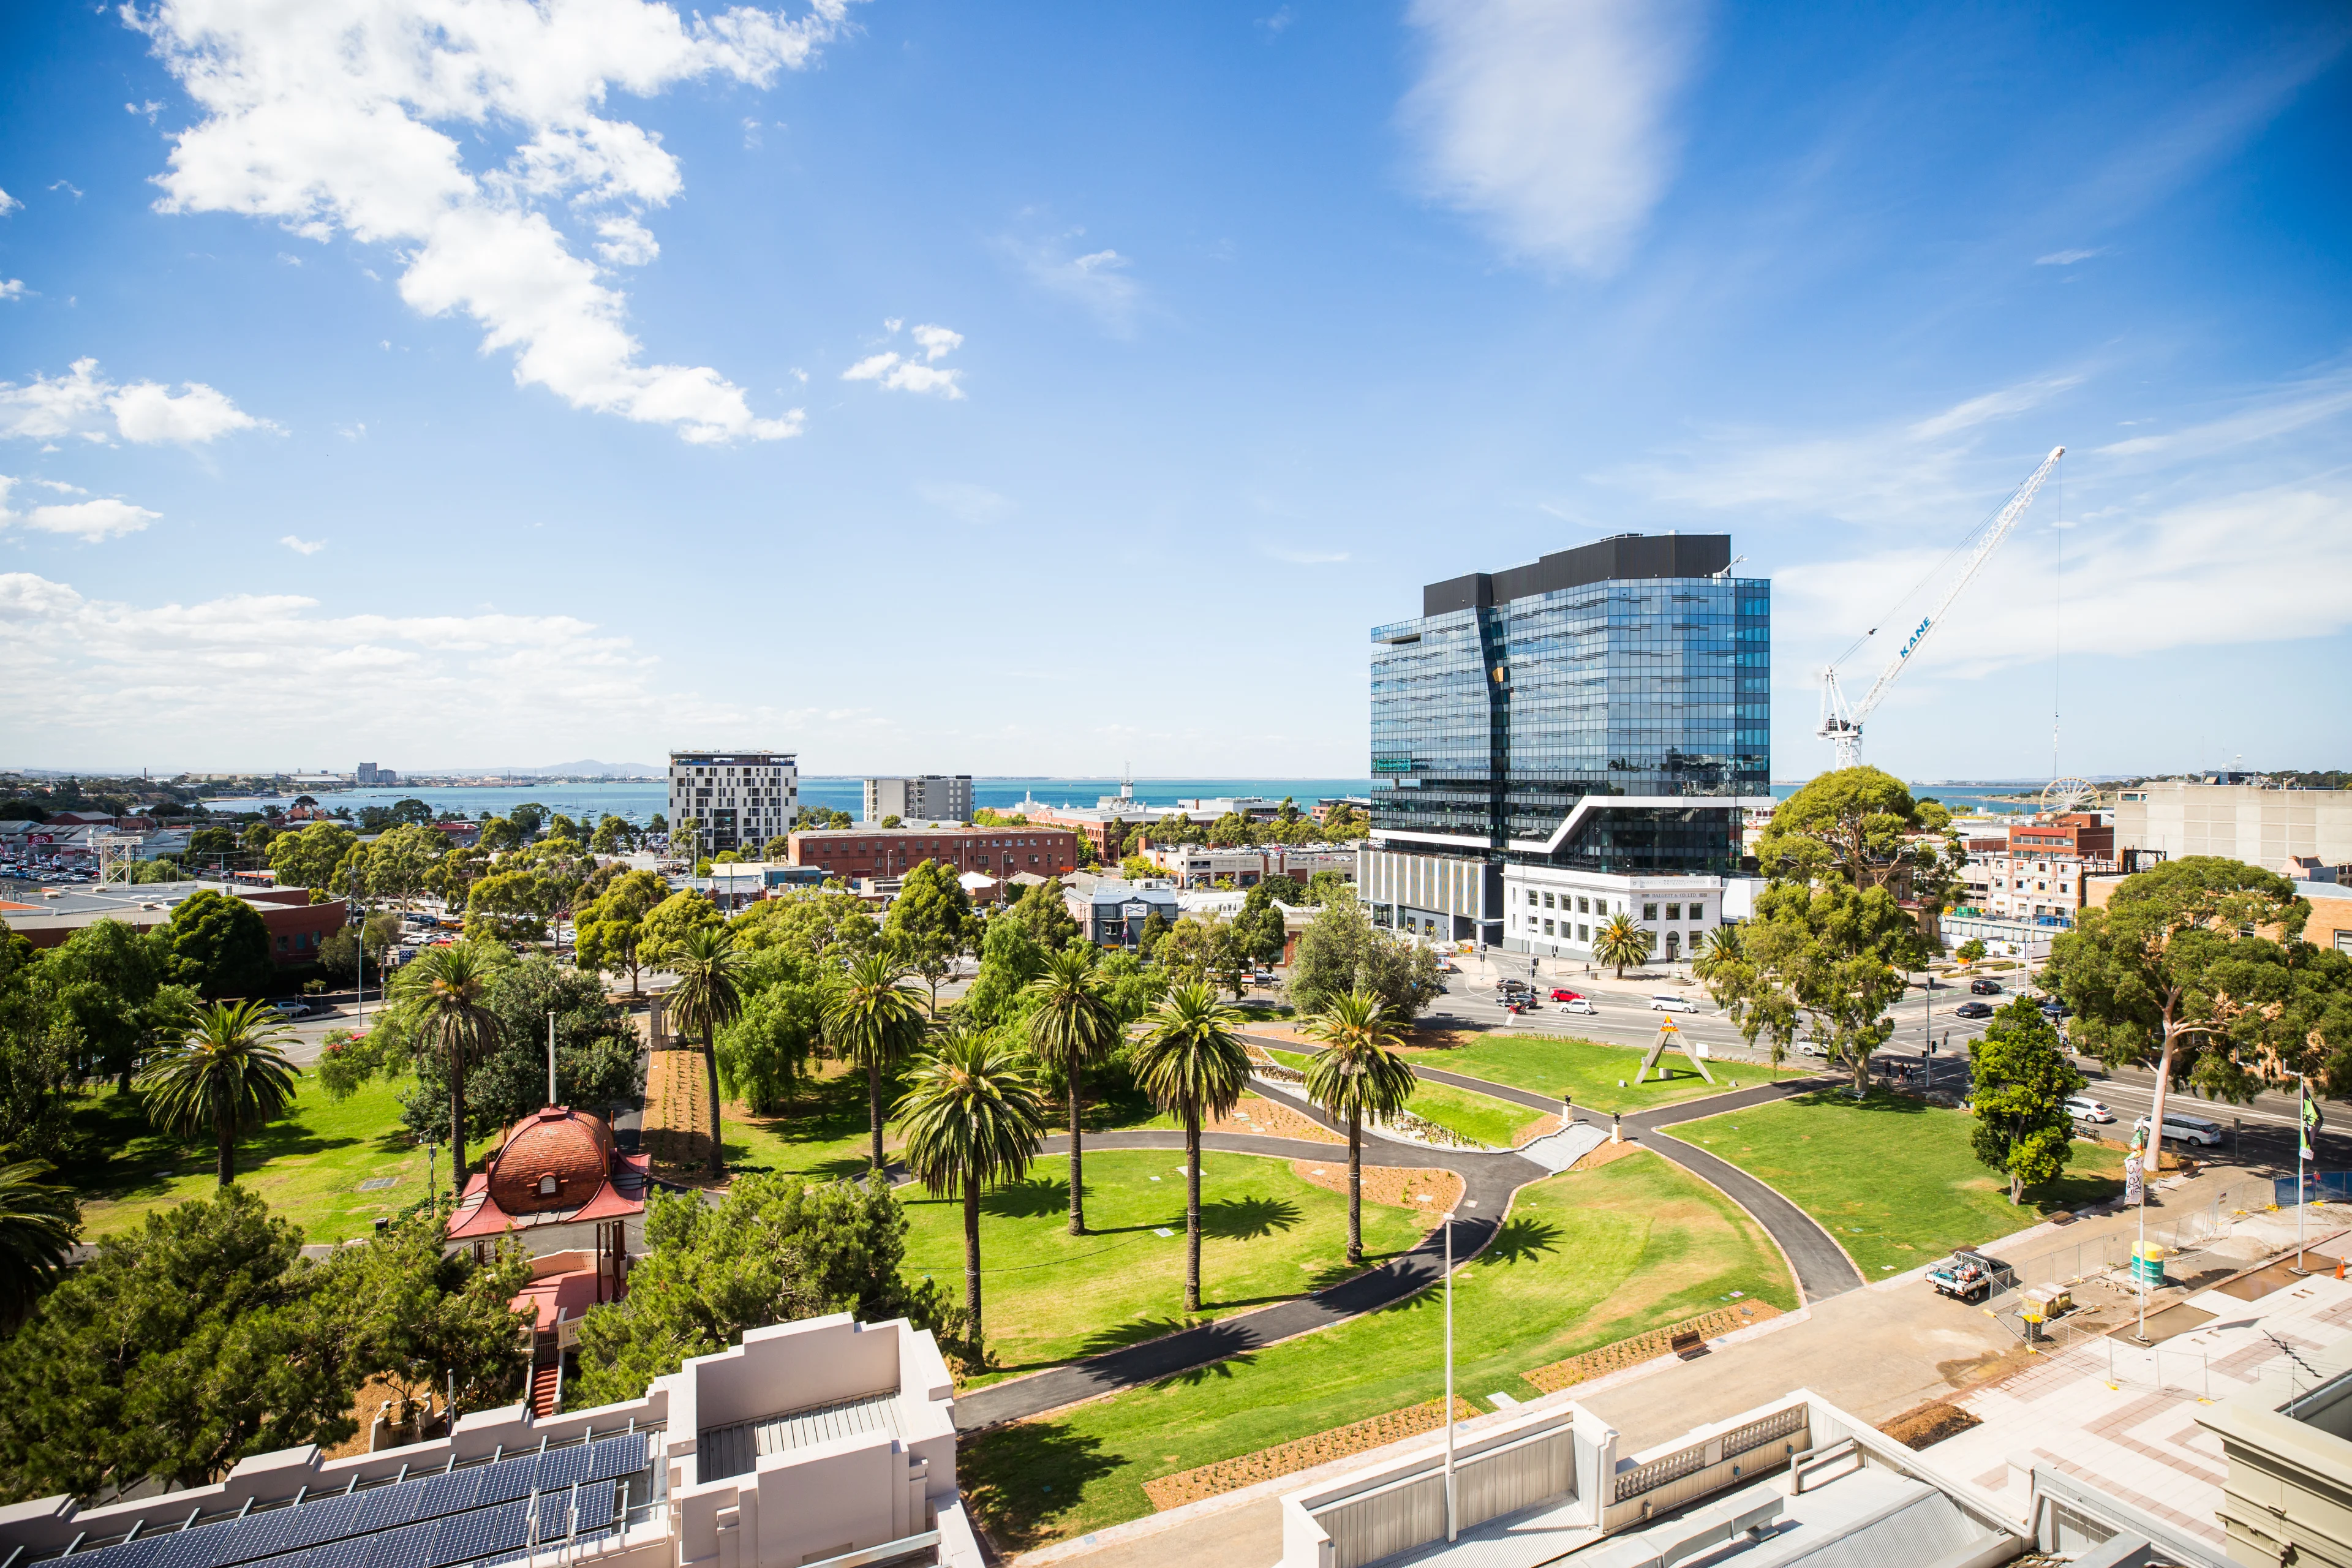 View of Johnstone Park to the Geelong Waterfront from the Geelong Library, Victoria